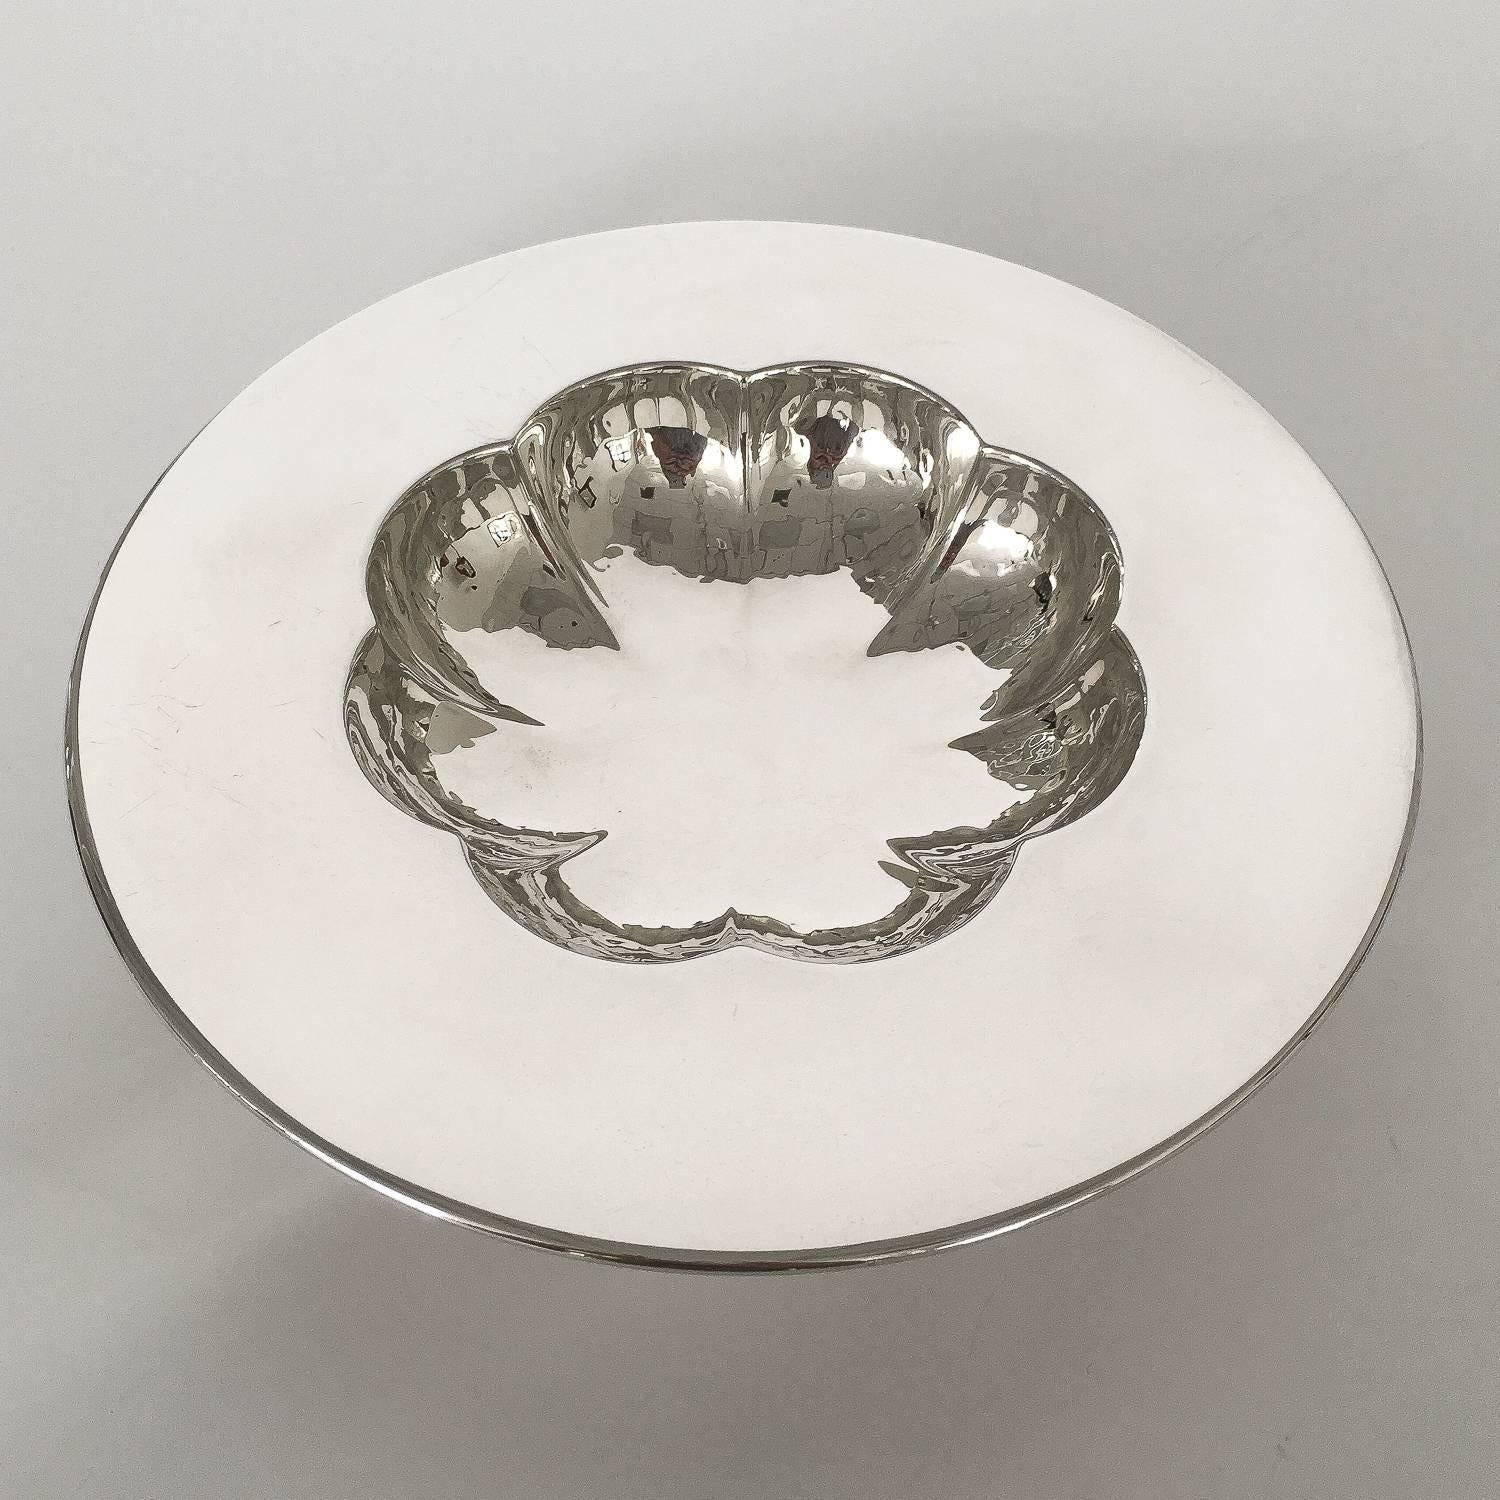 Michael Graves (1934-2015) silver plate bowl / candy dish for Swid Powell, circa 1989. This round bowl features a wide flat rim with a scalloped interior bowl with peen-hammered finish and sits on a fixed cruciform base. Signed and dated on the